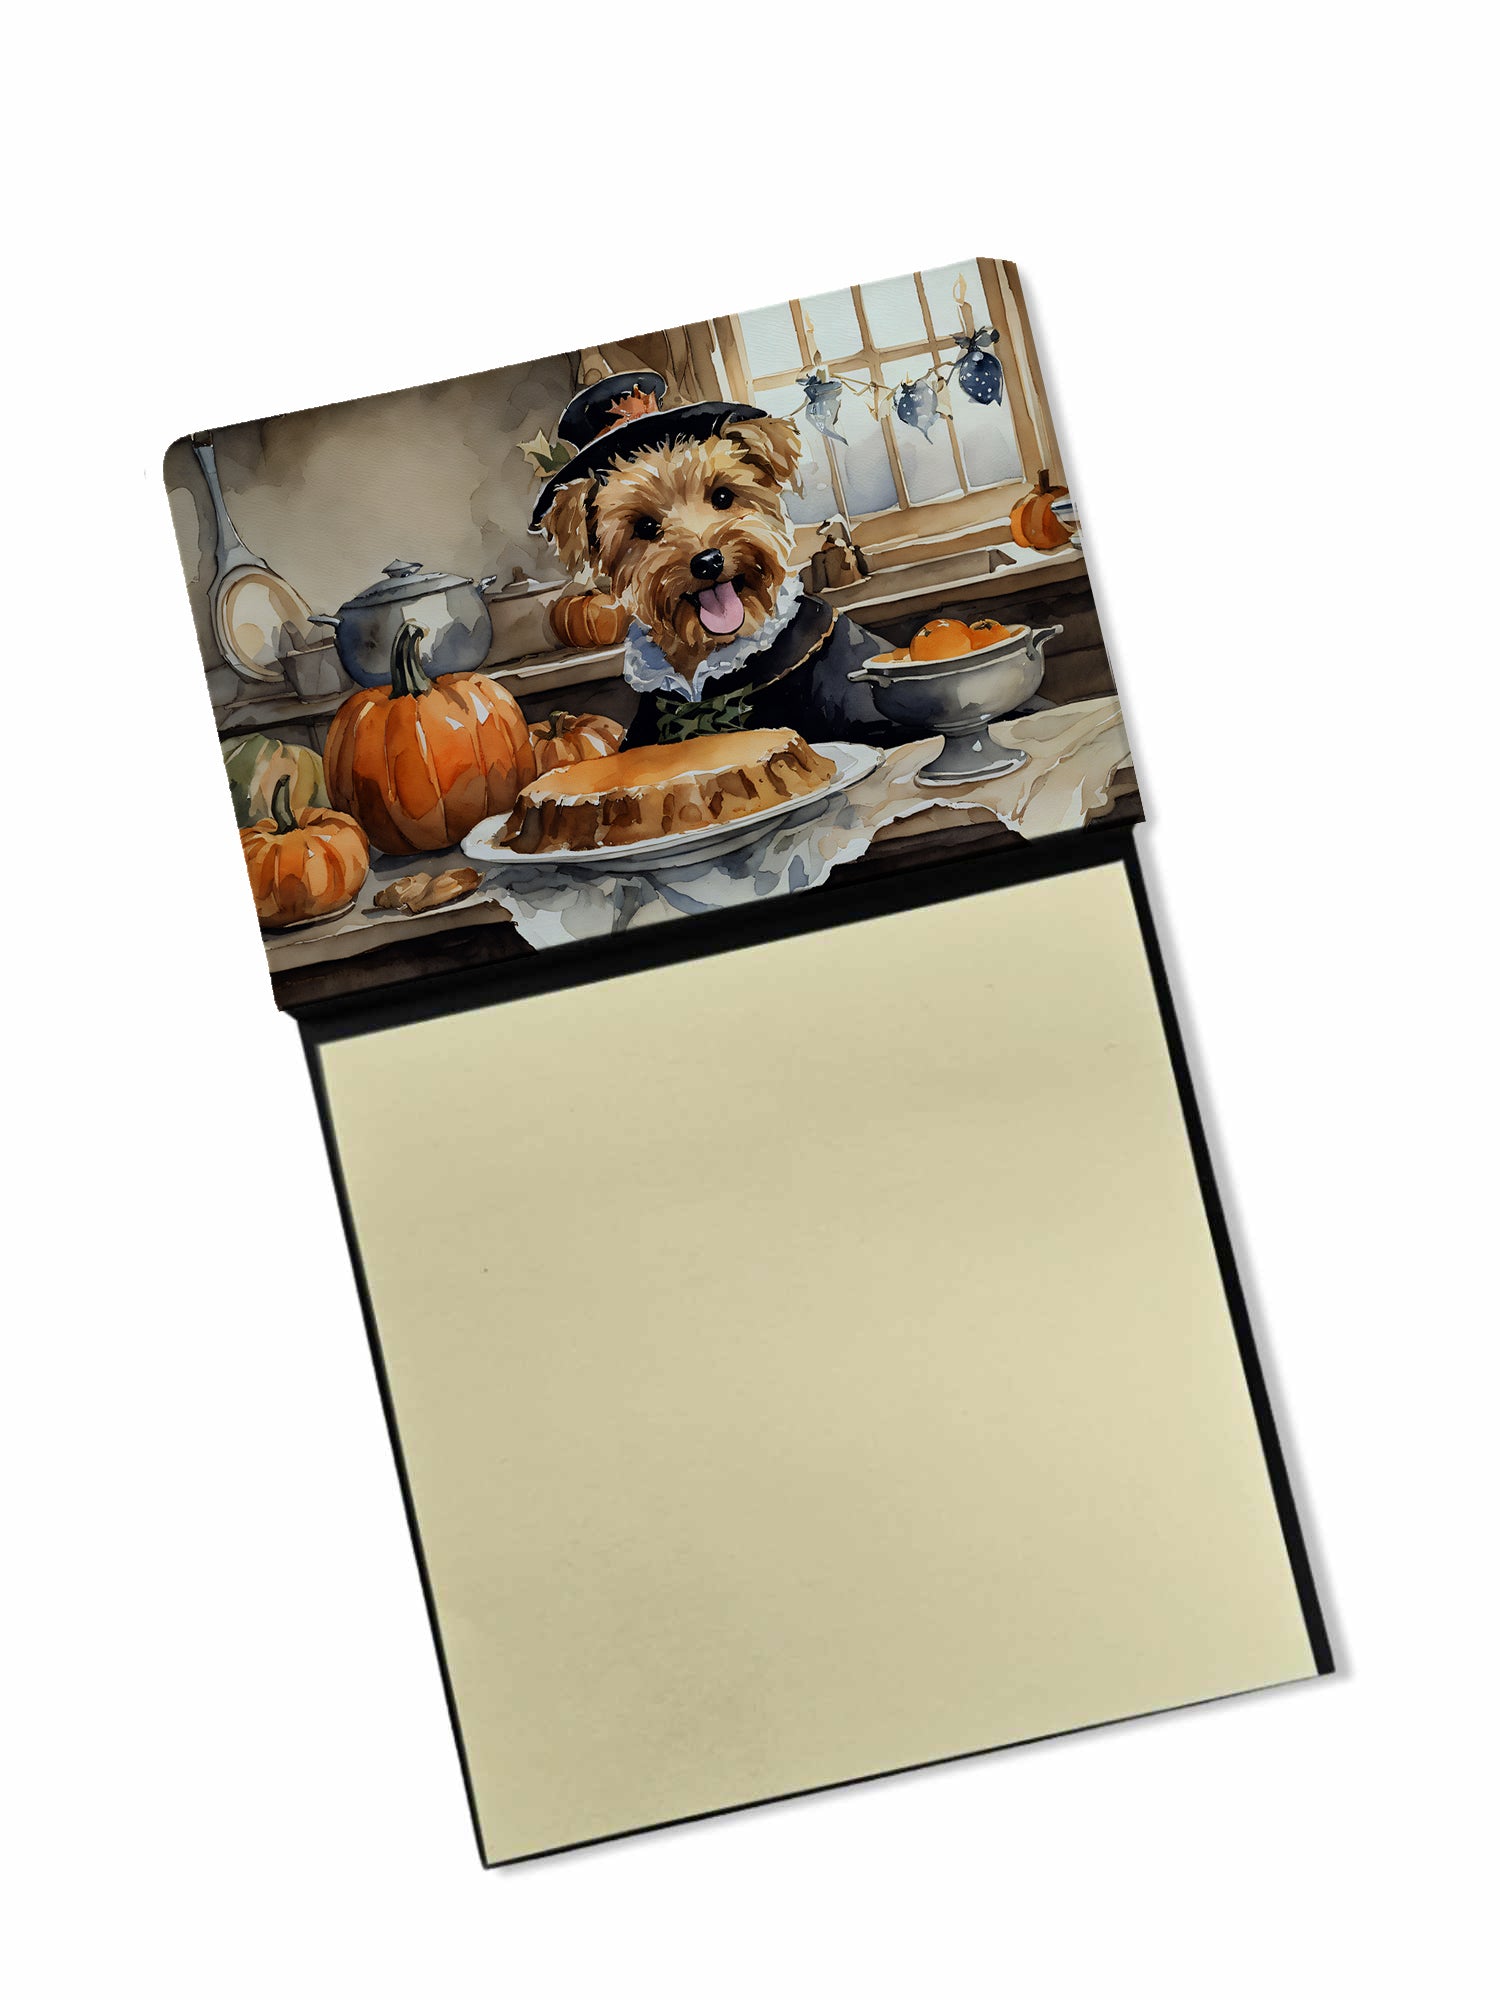 Buy this Lakeland Terrier Fall Kitchen Pumpkins Sticky Note Holder